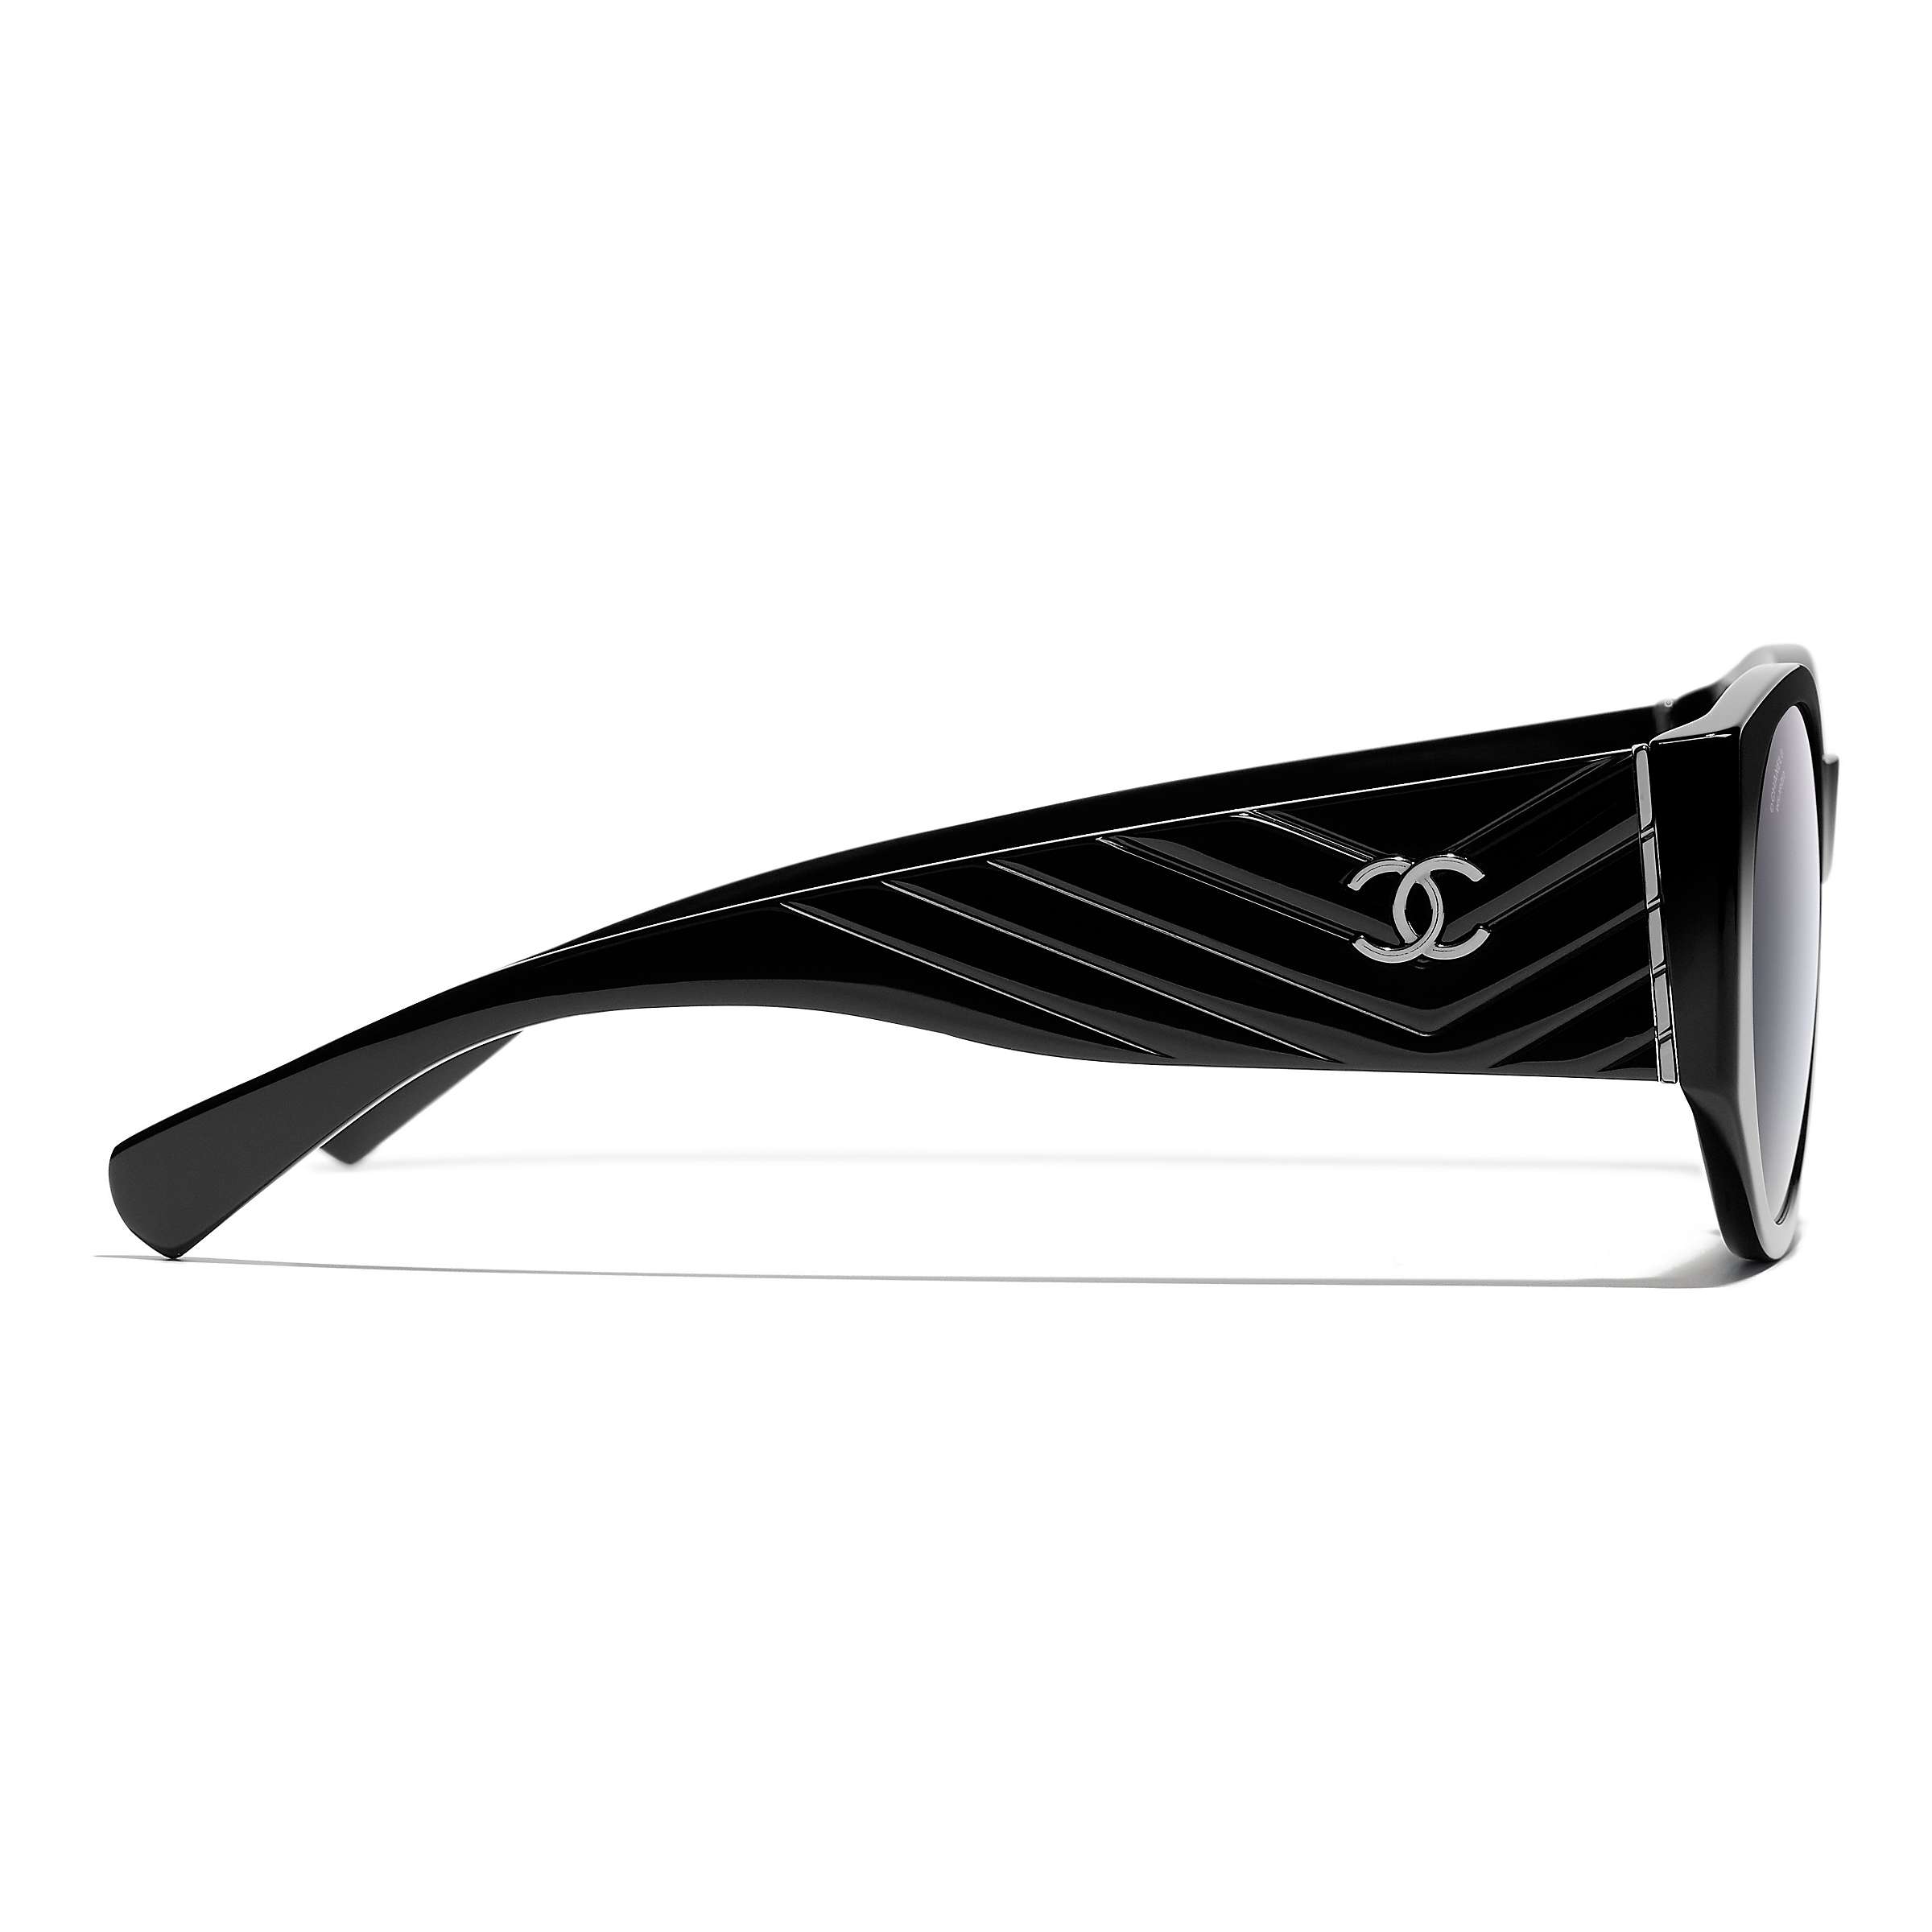 Buy CHANEL Oval Sunglasses CH5411 Black/Grey Online at johnlewis.com